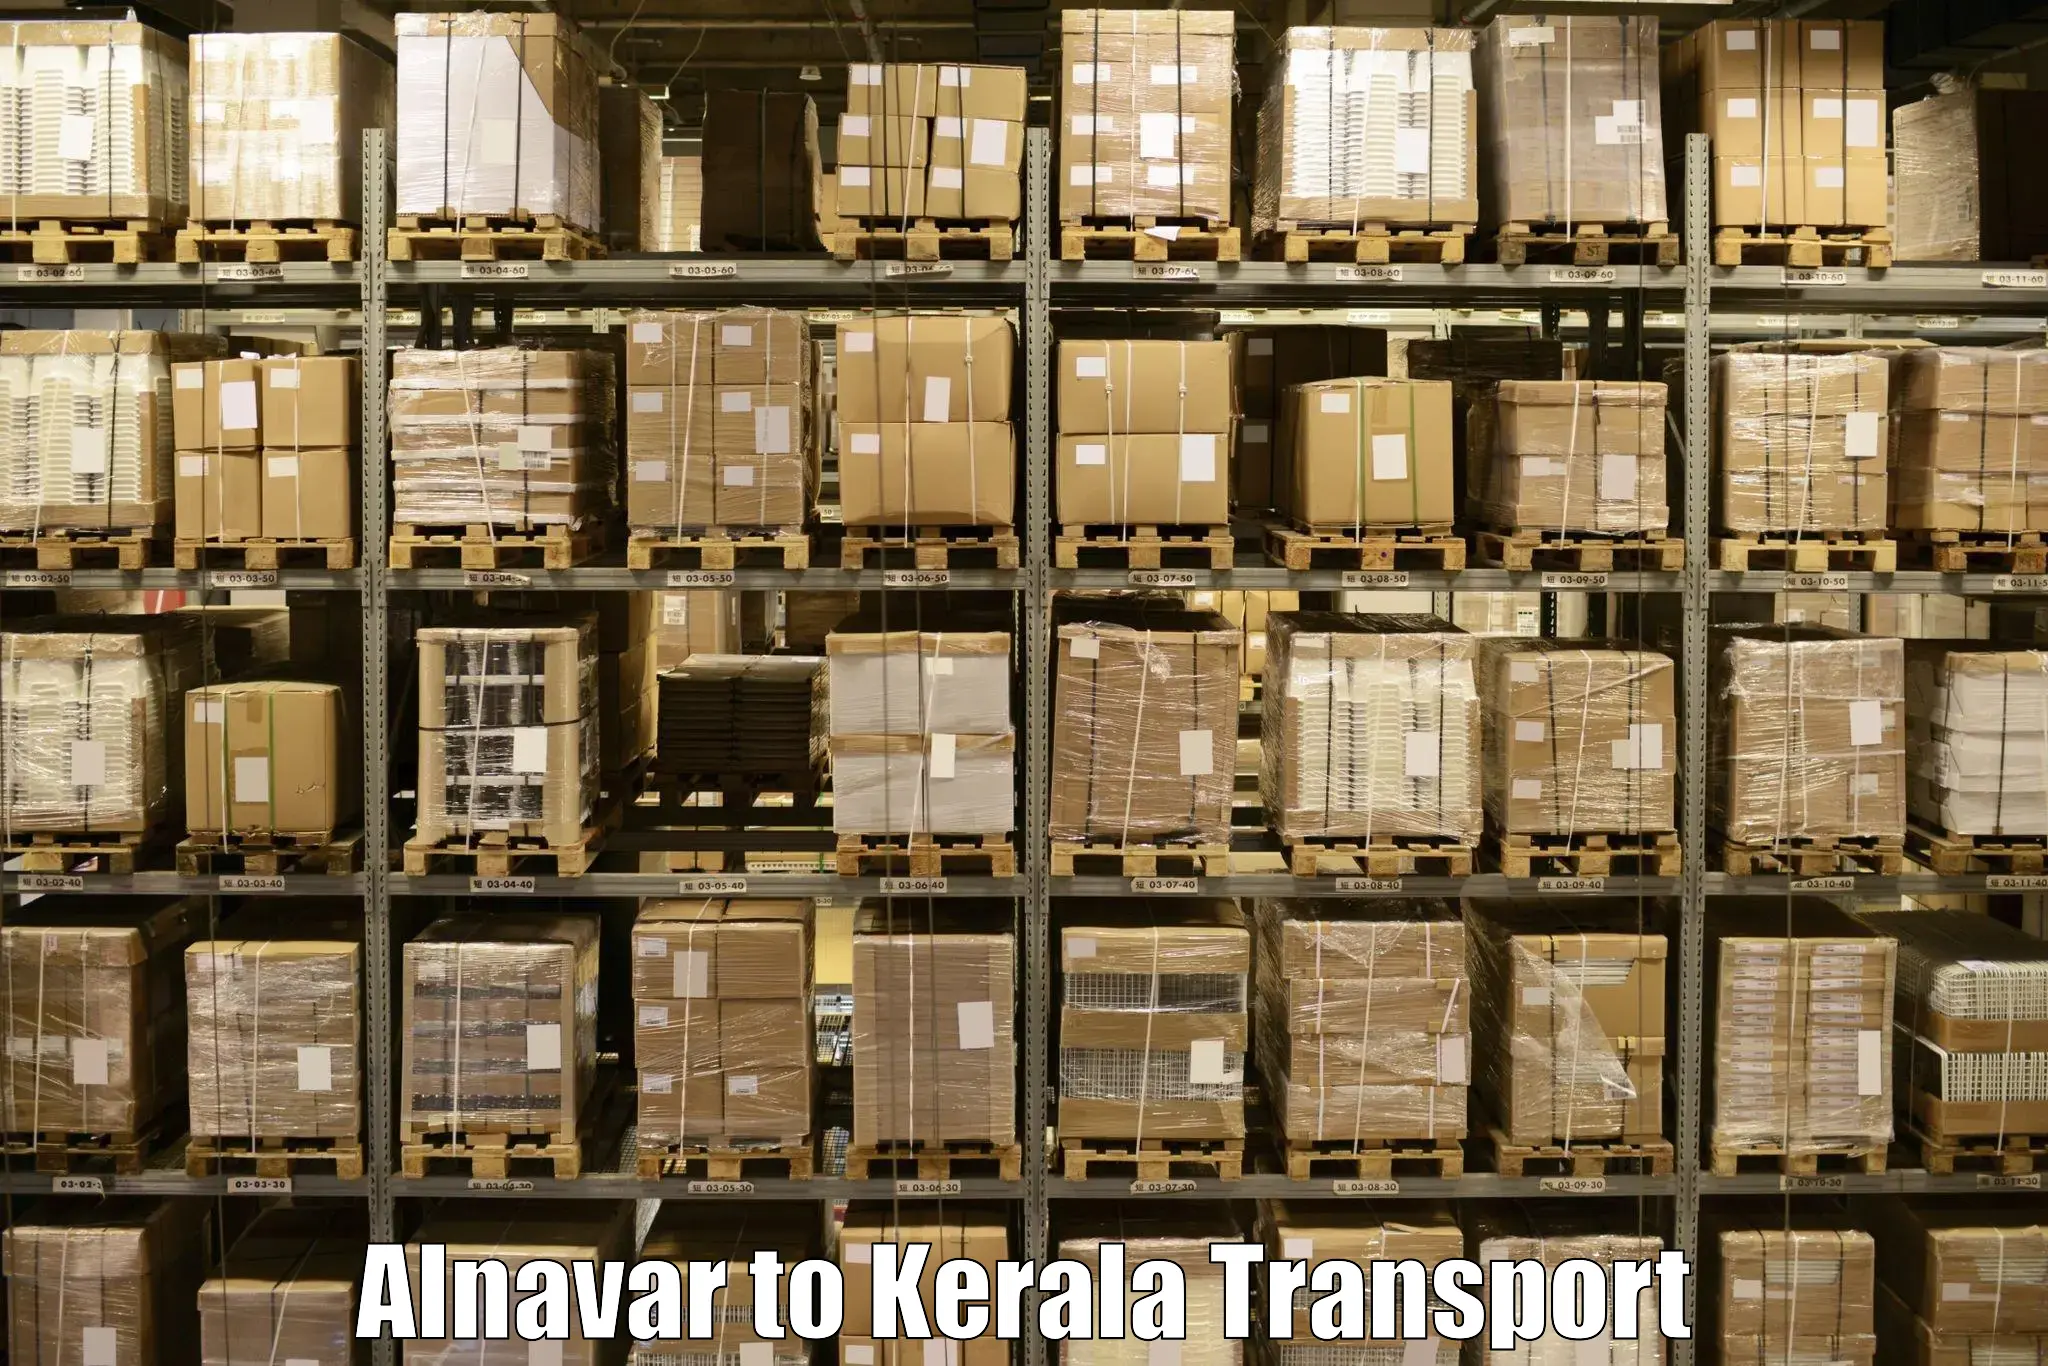 Package delivery services Alnavar to Cochin Port Kochi